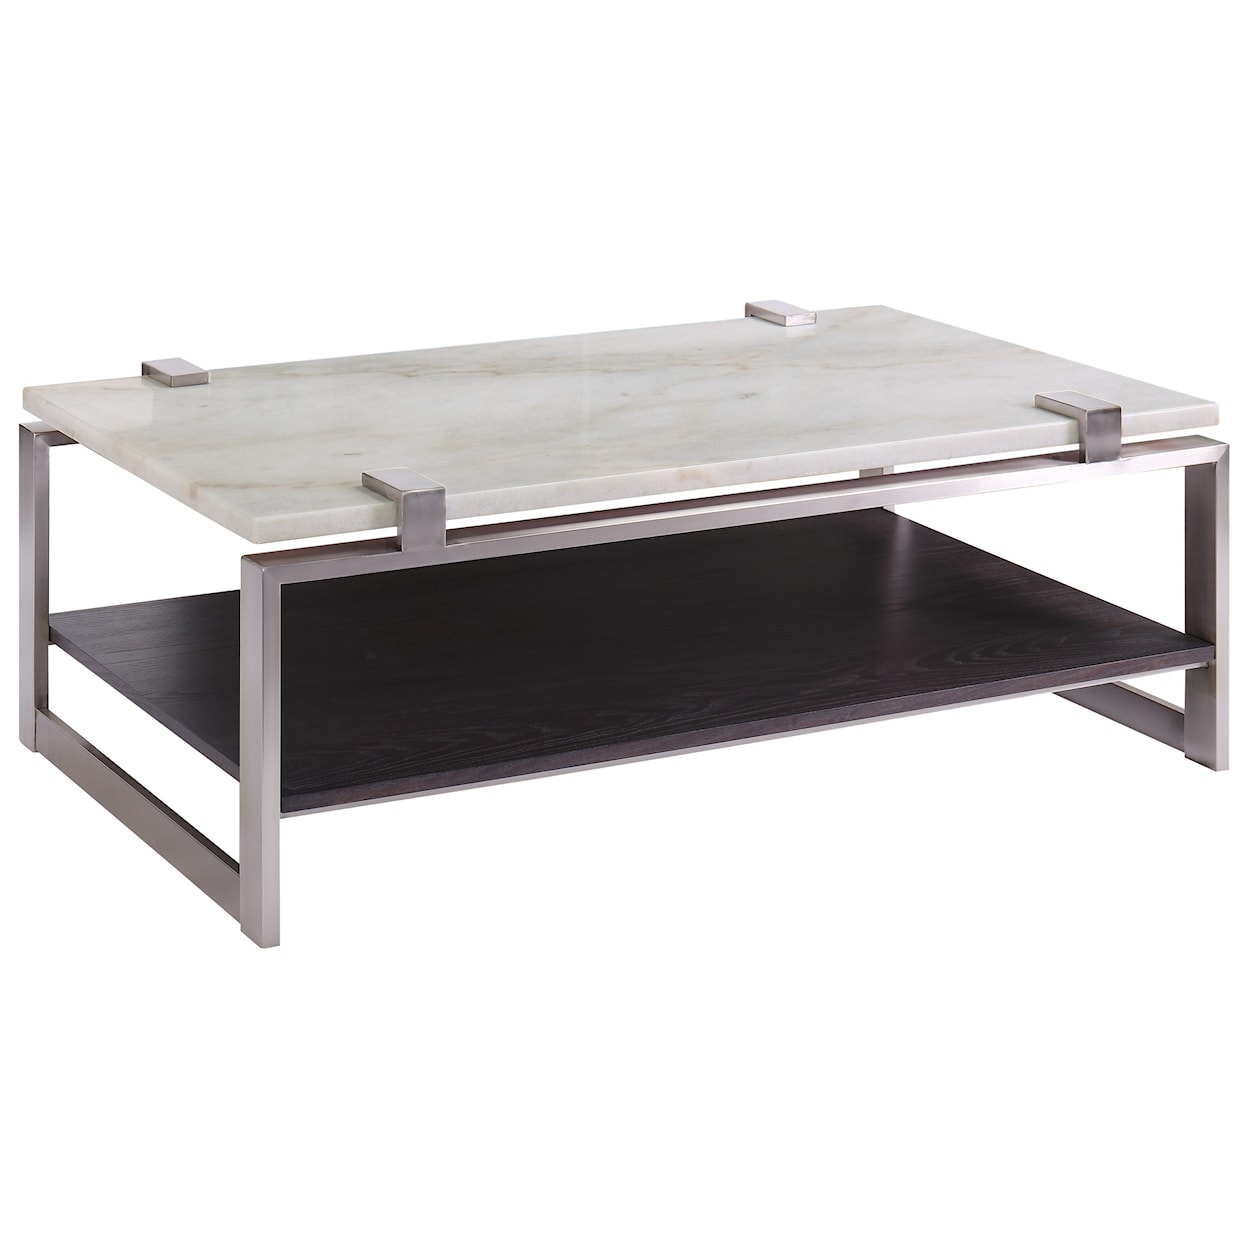 Belfort Select Paradox Occasional Tables Cocktail Table